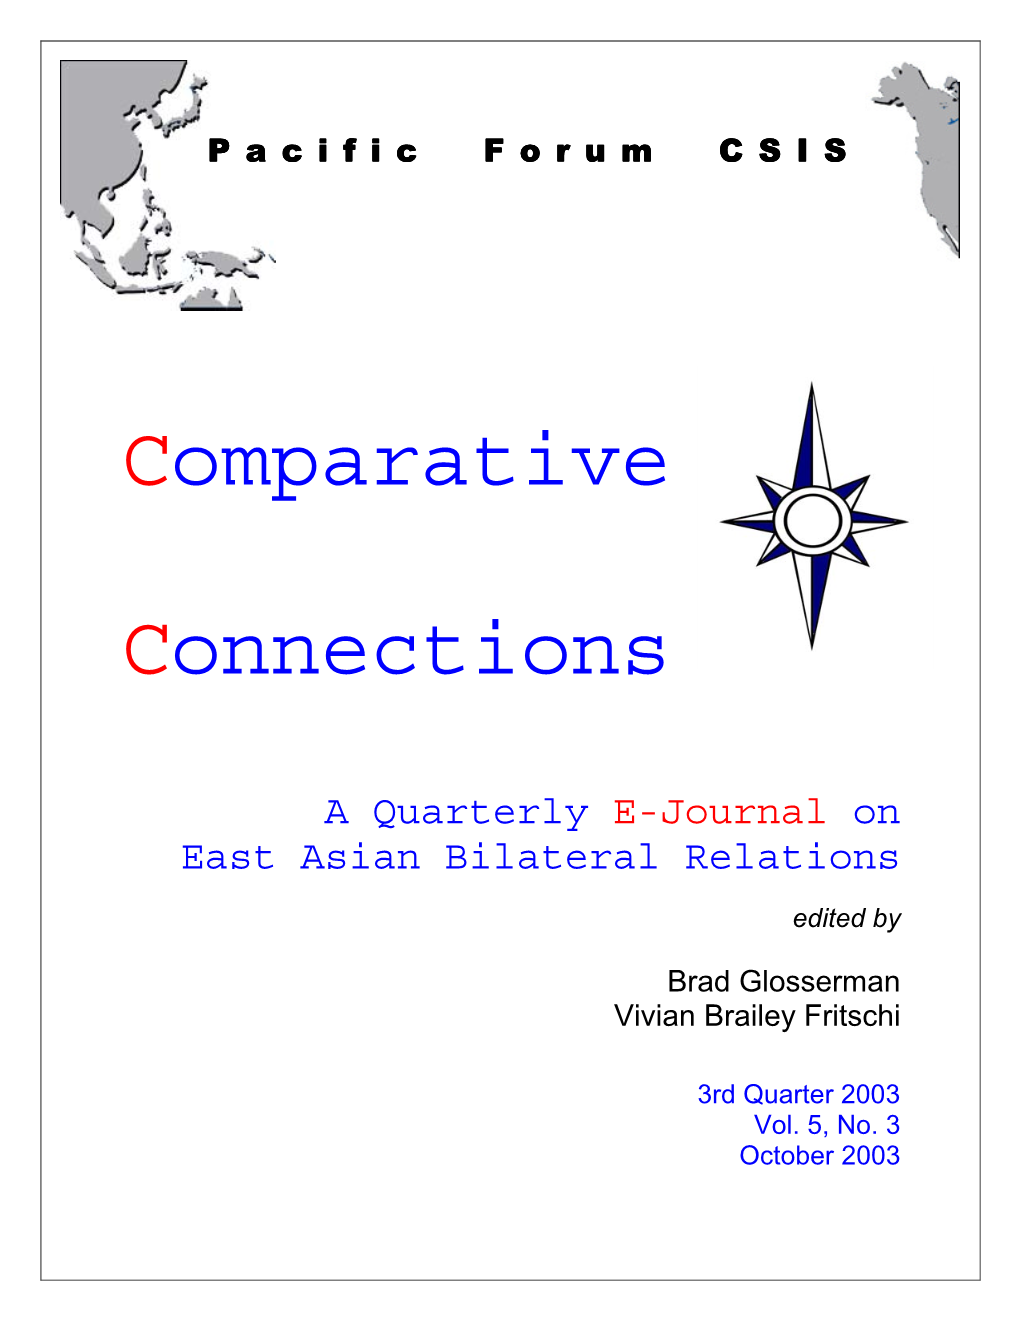 Comparative Connections, Volume 5, Number 3